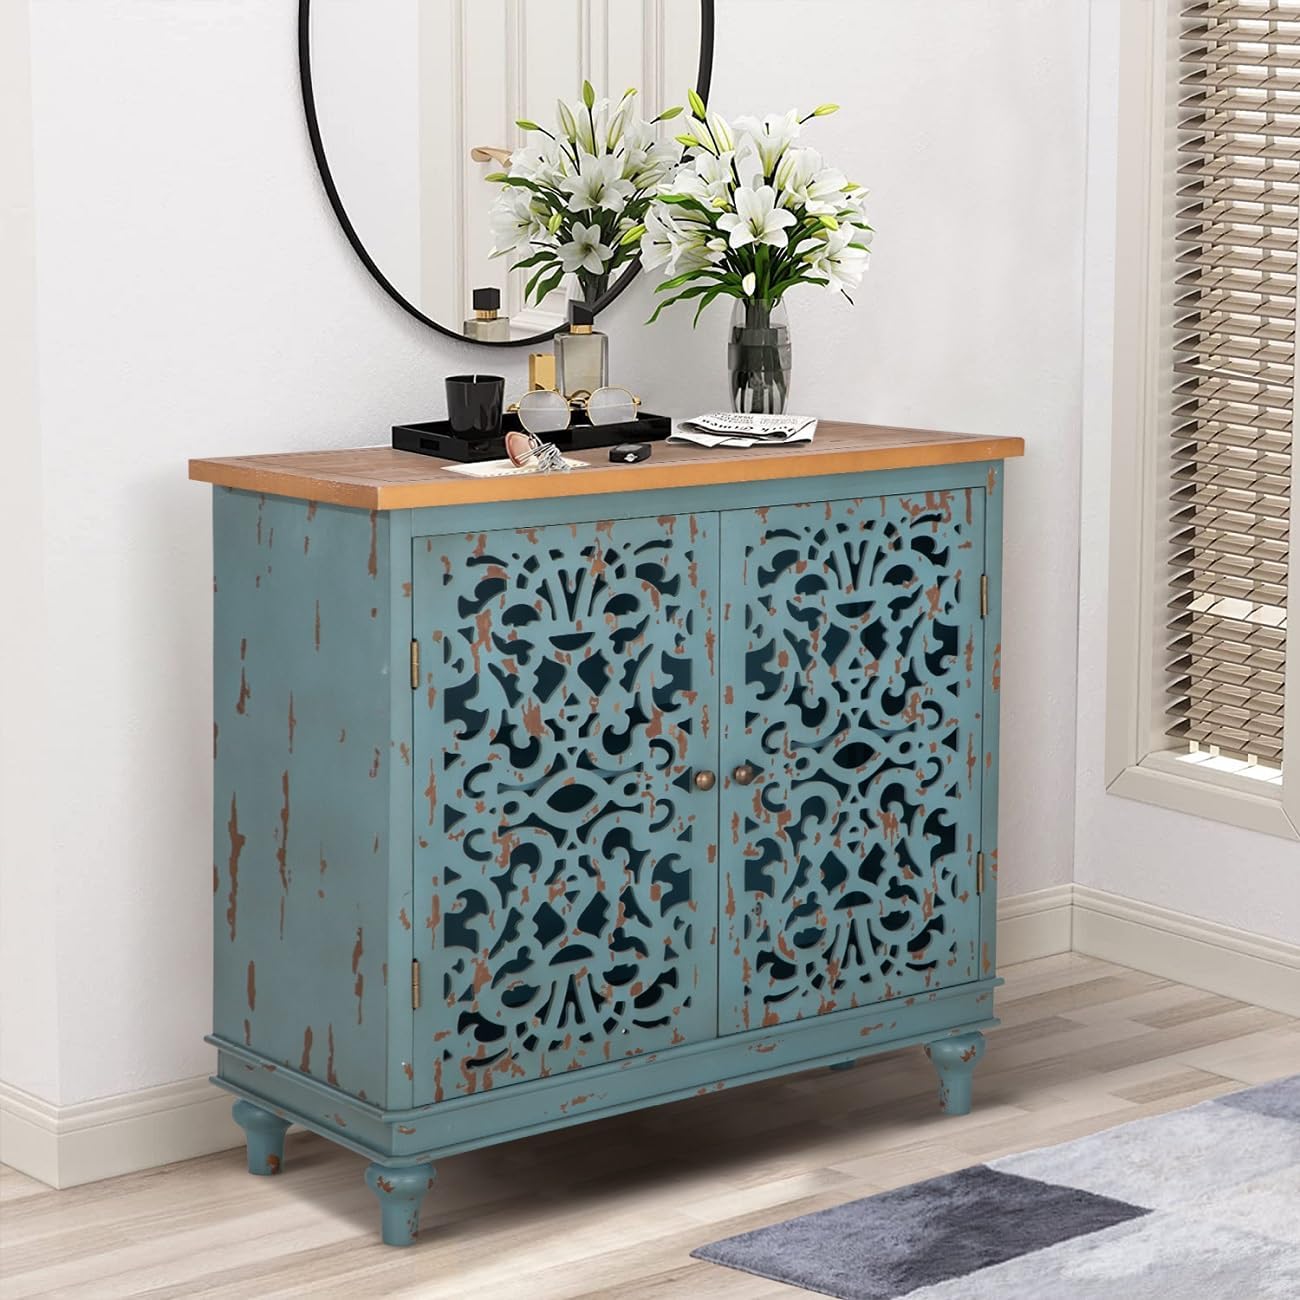 MFSTUDIO Accent Storage Cabinet Buffet Cabinet, Distressed Wooden and Hollow-Carved Floral Sideboard Storage Organizer with 2 Doors, Display Storage for Living Room Entryway Floor Kitchen Blue Large